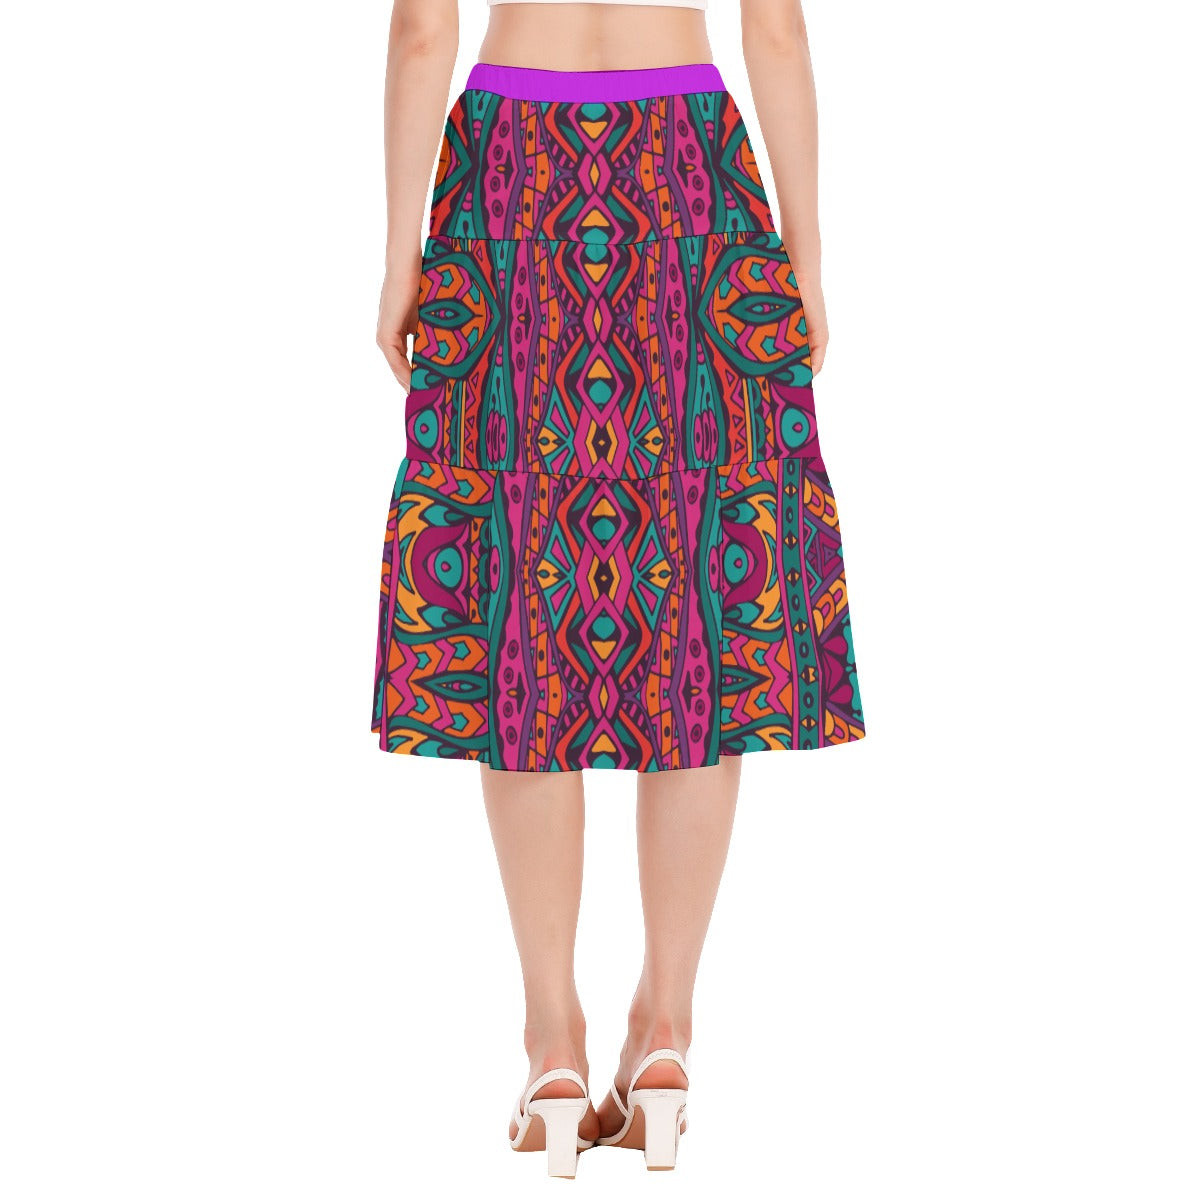 All-Over Print Women's Stitched Pleated Chiffon Skirt